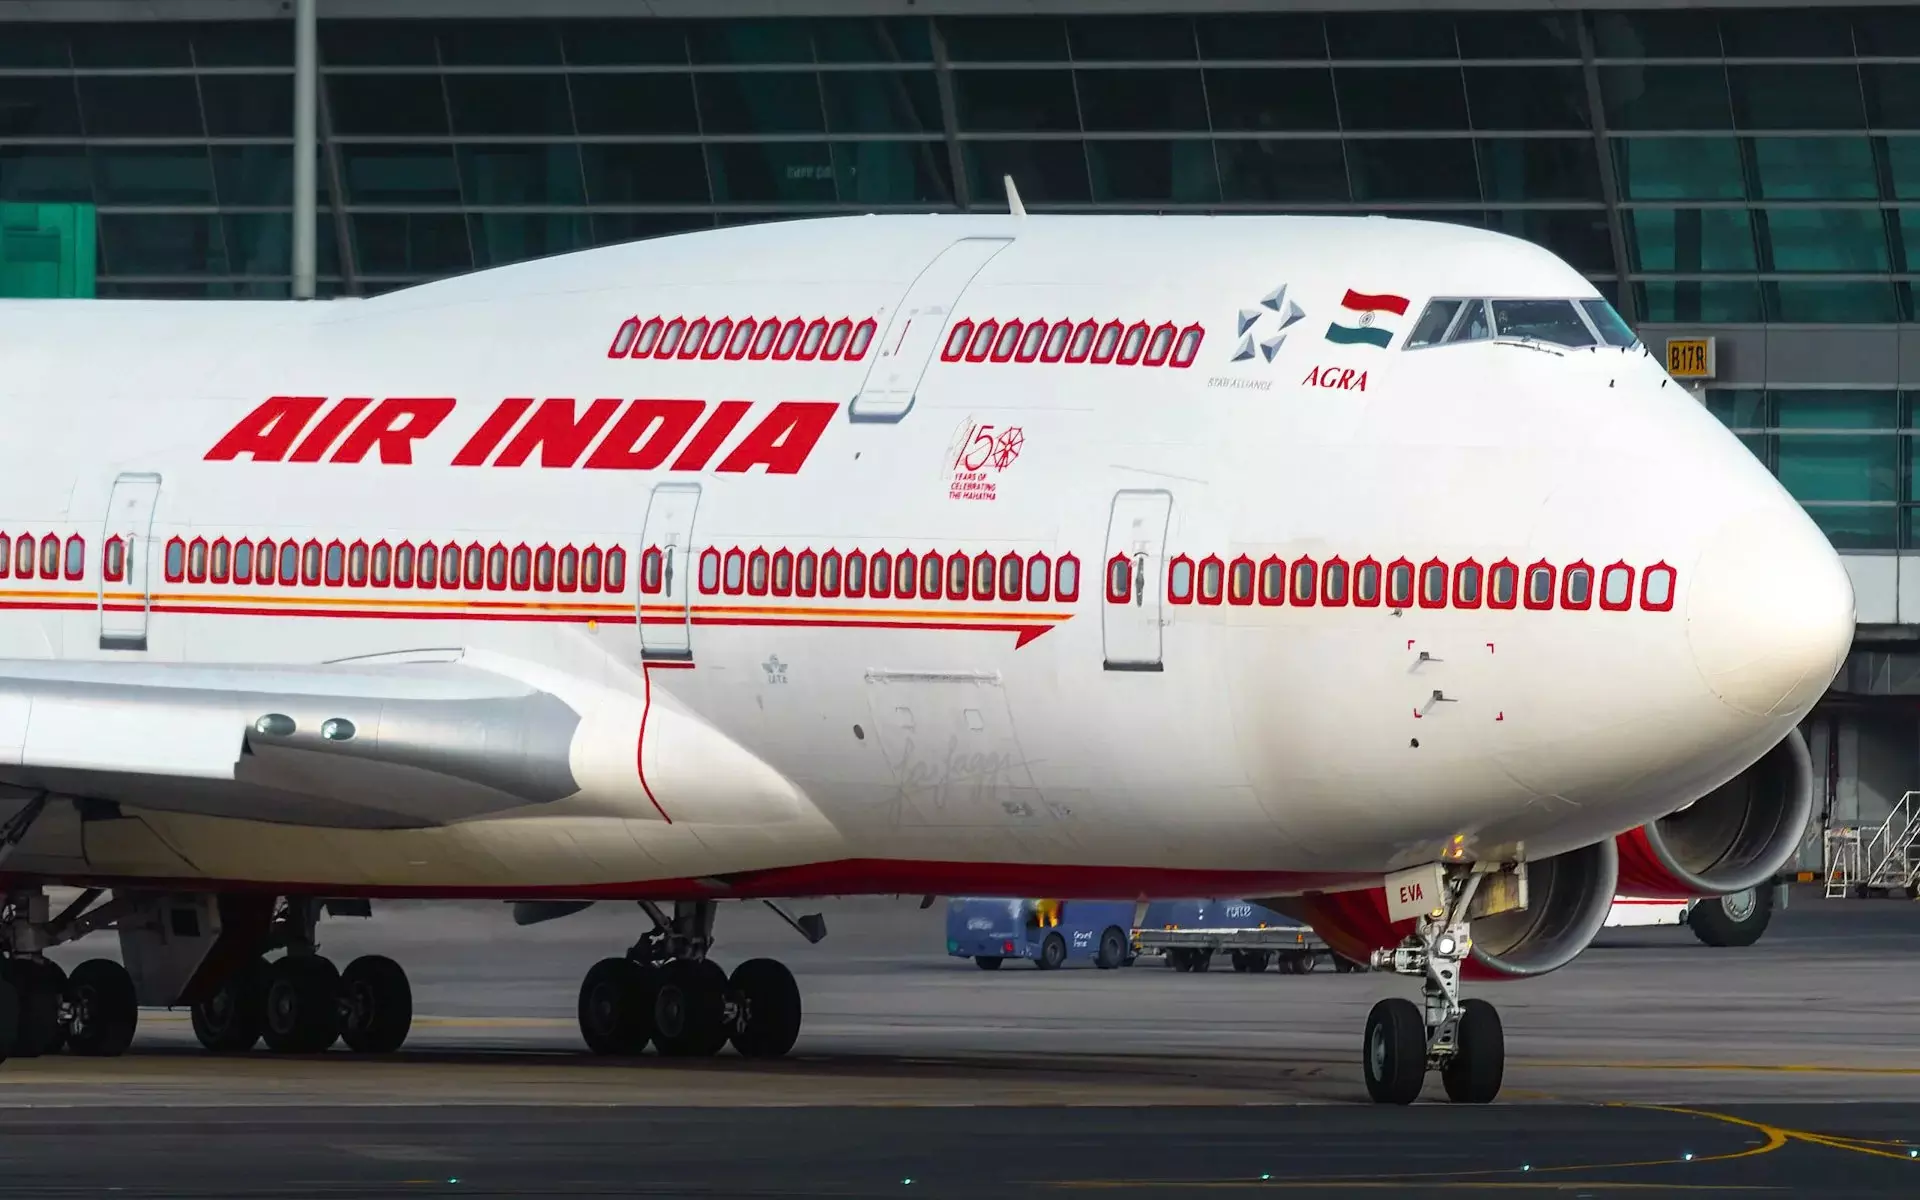 Goodbye, wing wave as Air India bids adieu to one of its last Boeing 747s